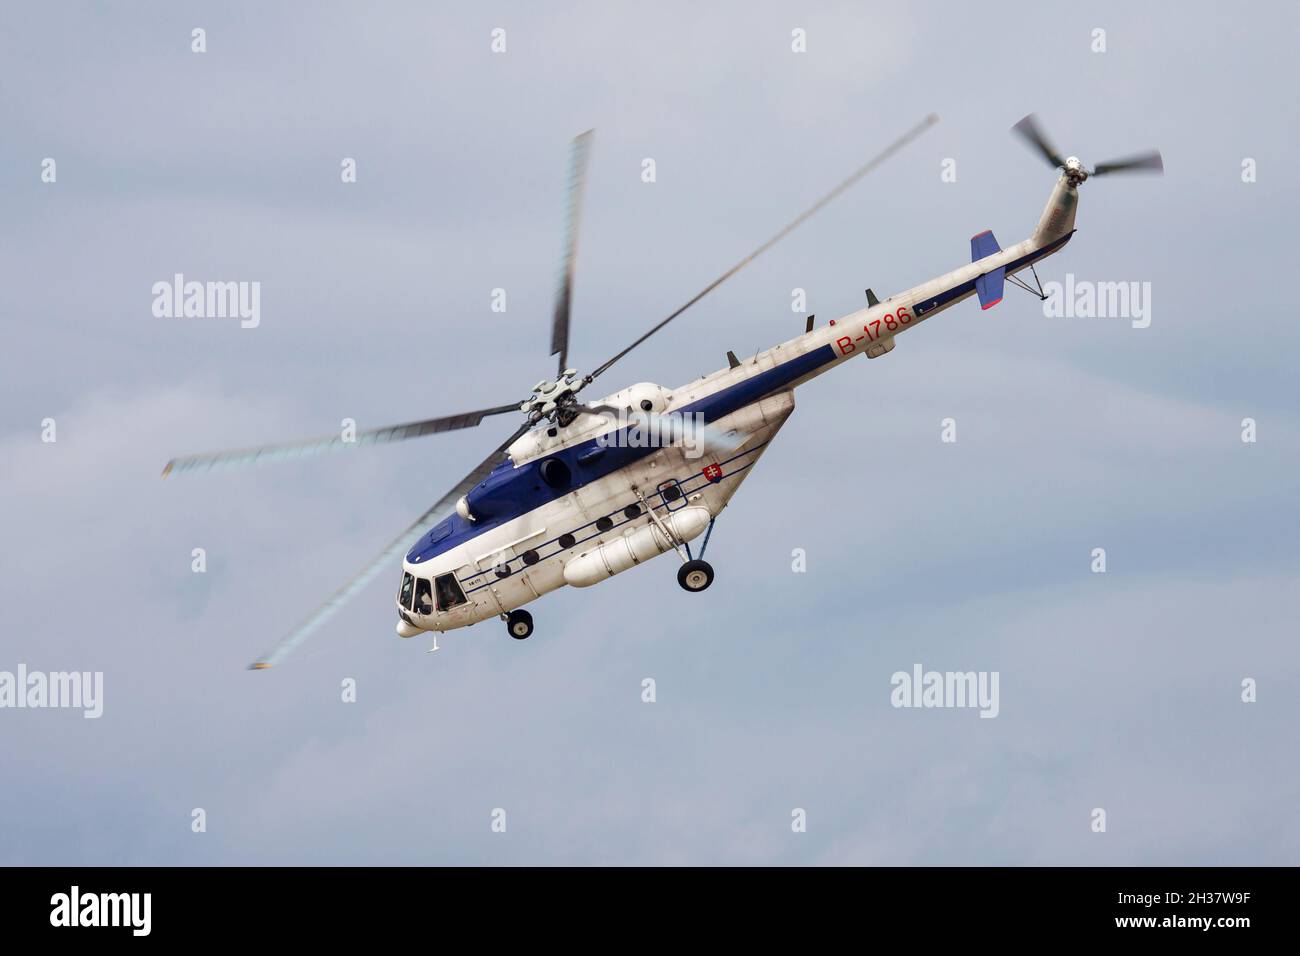 Sliac, Slovakia - August 30, 2014: Government police helicopter at airport. Aviation and aircraft. Commercial and general aviation. Aviation industry. Stock Photo